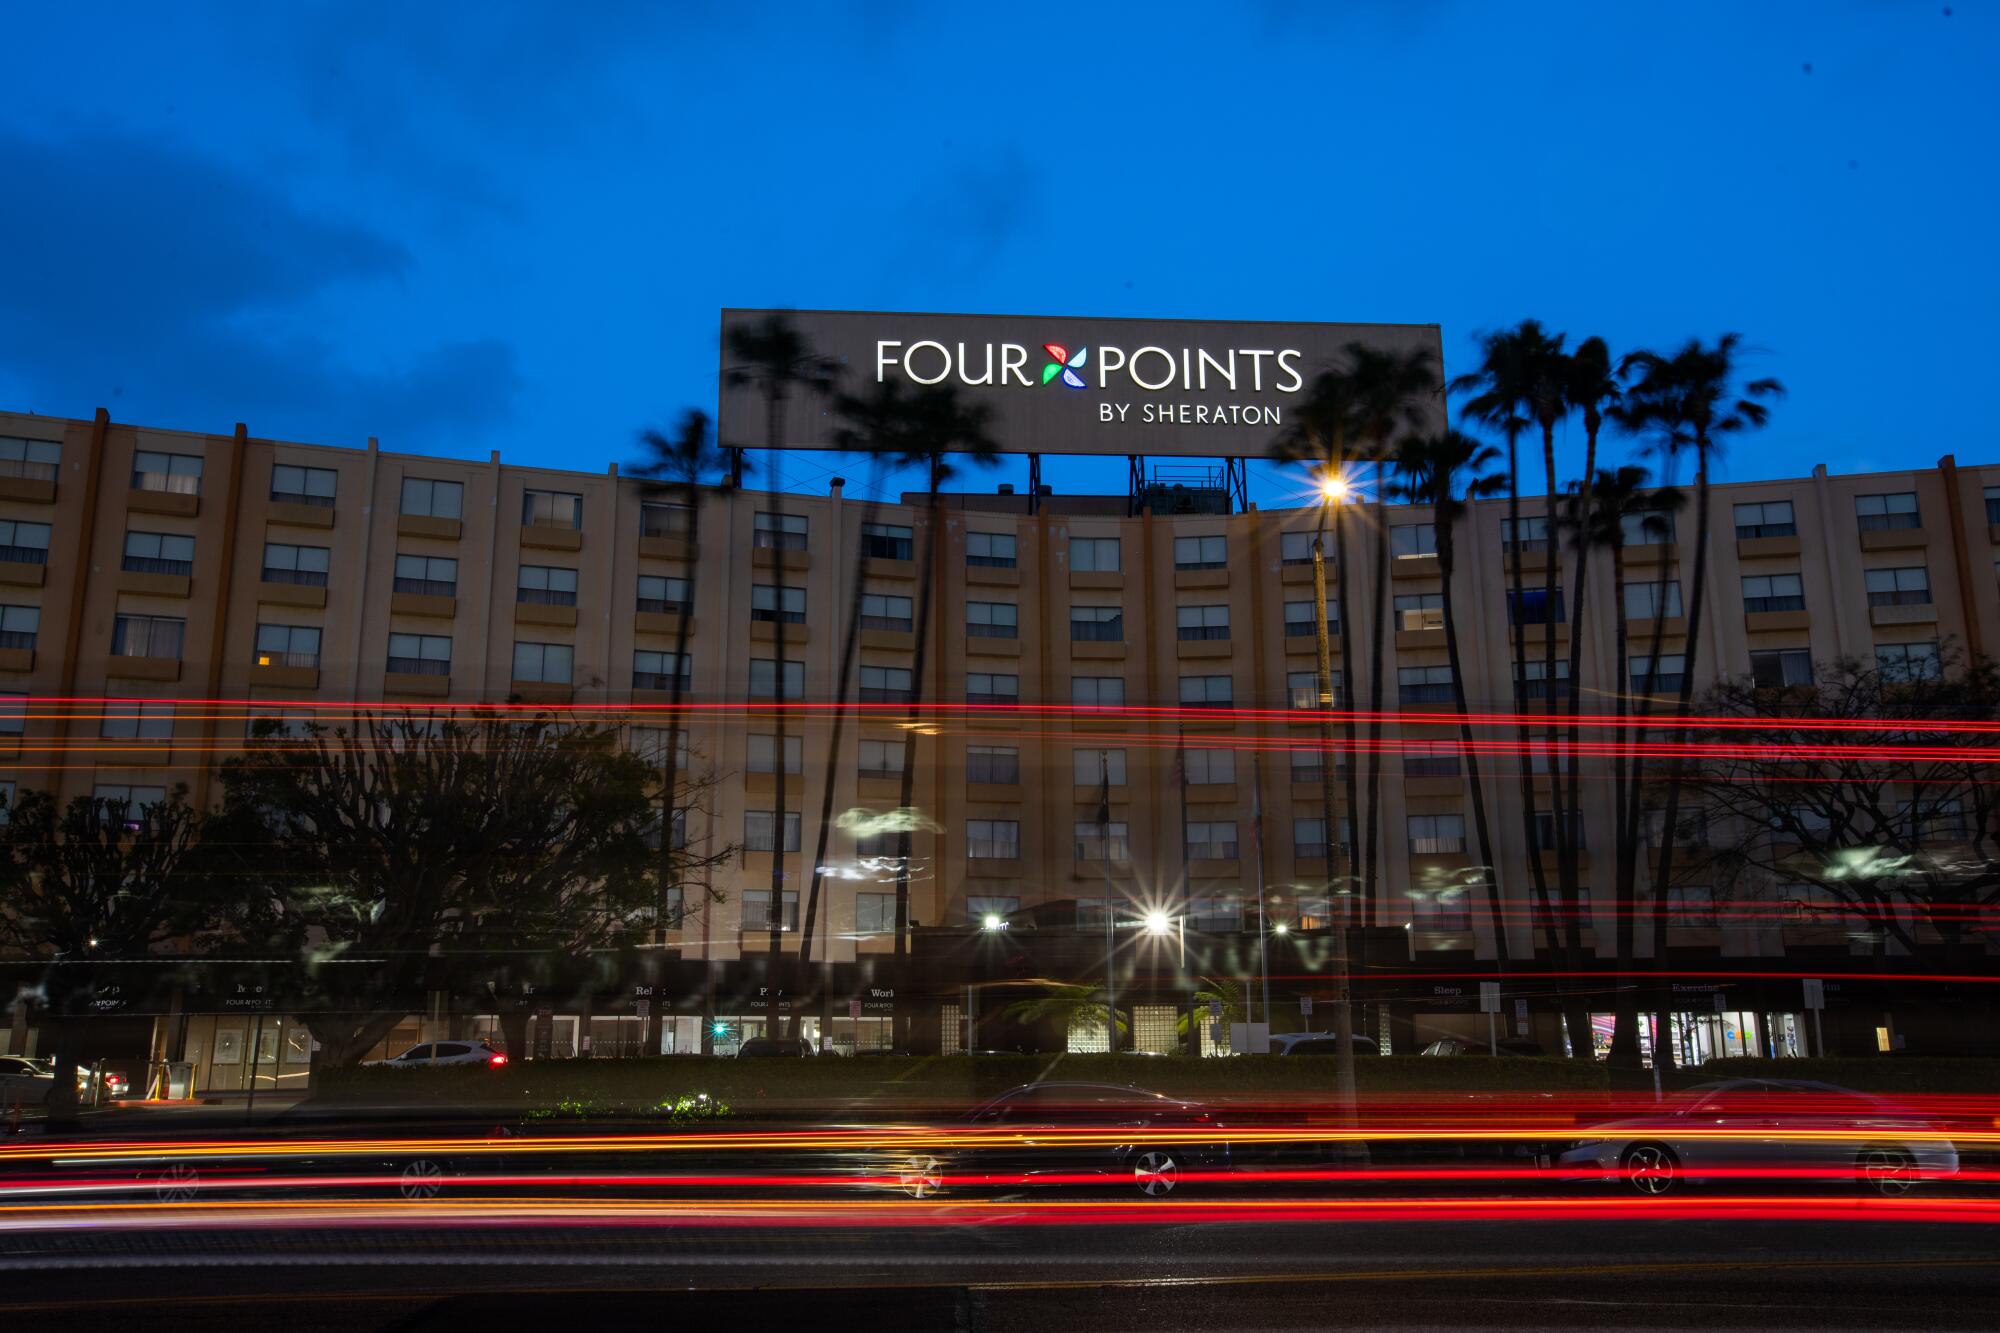 The Four Points by Sheraton hotel near Los Angeles International Airport